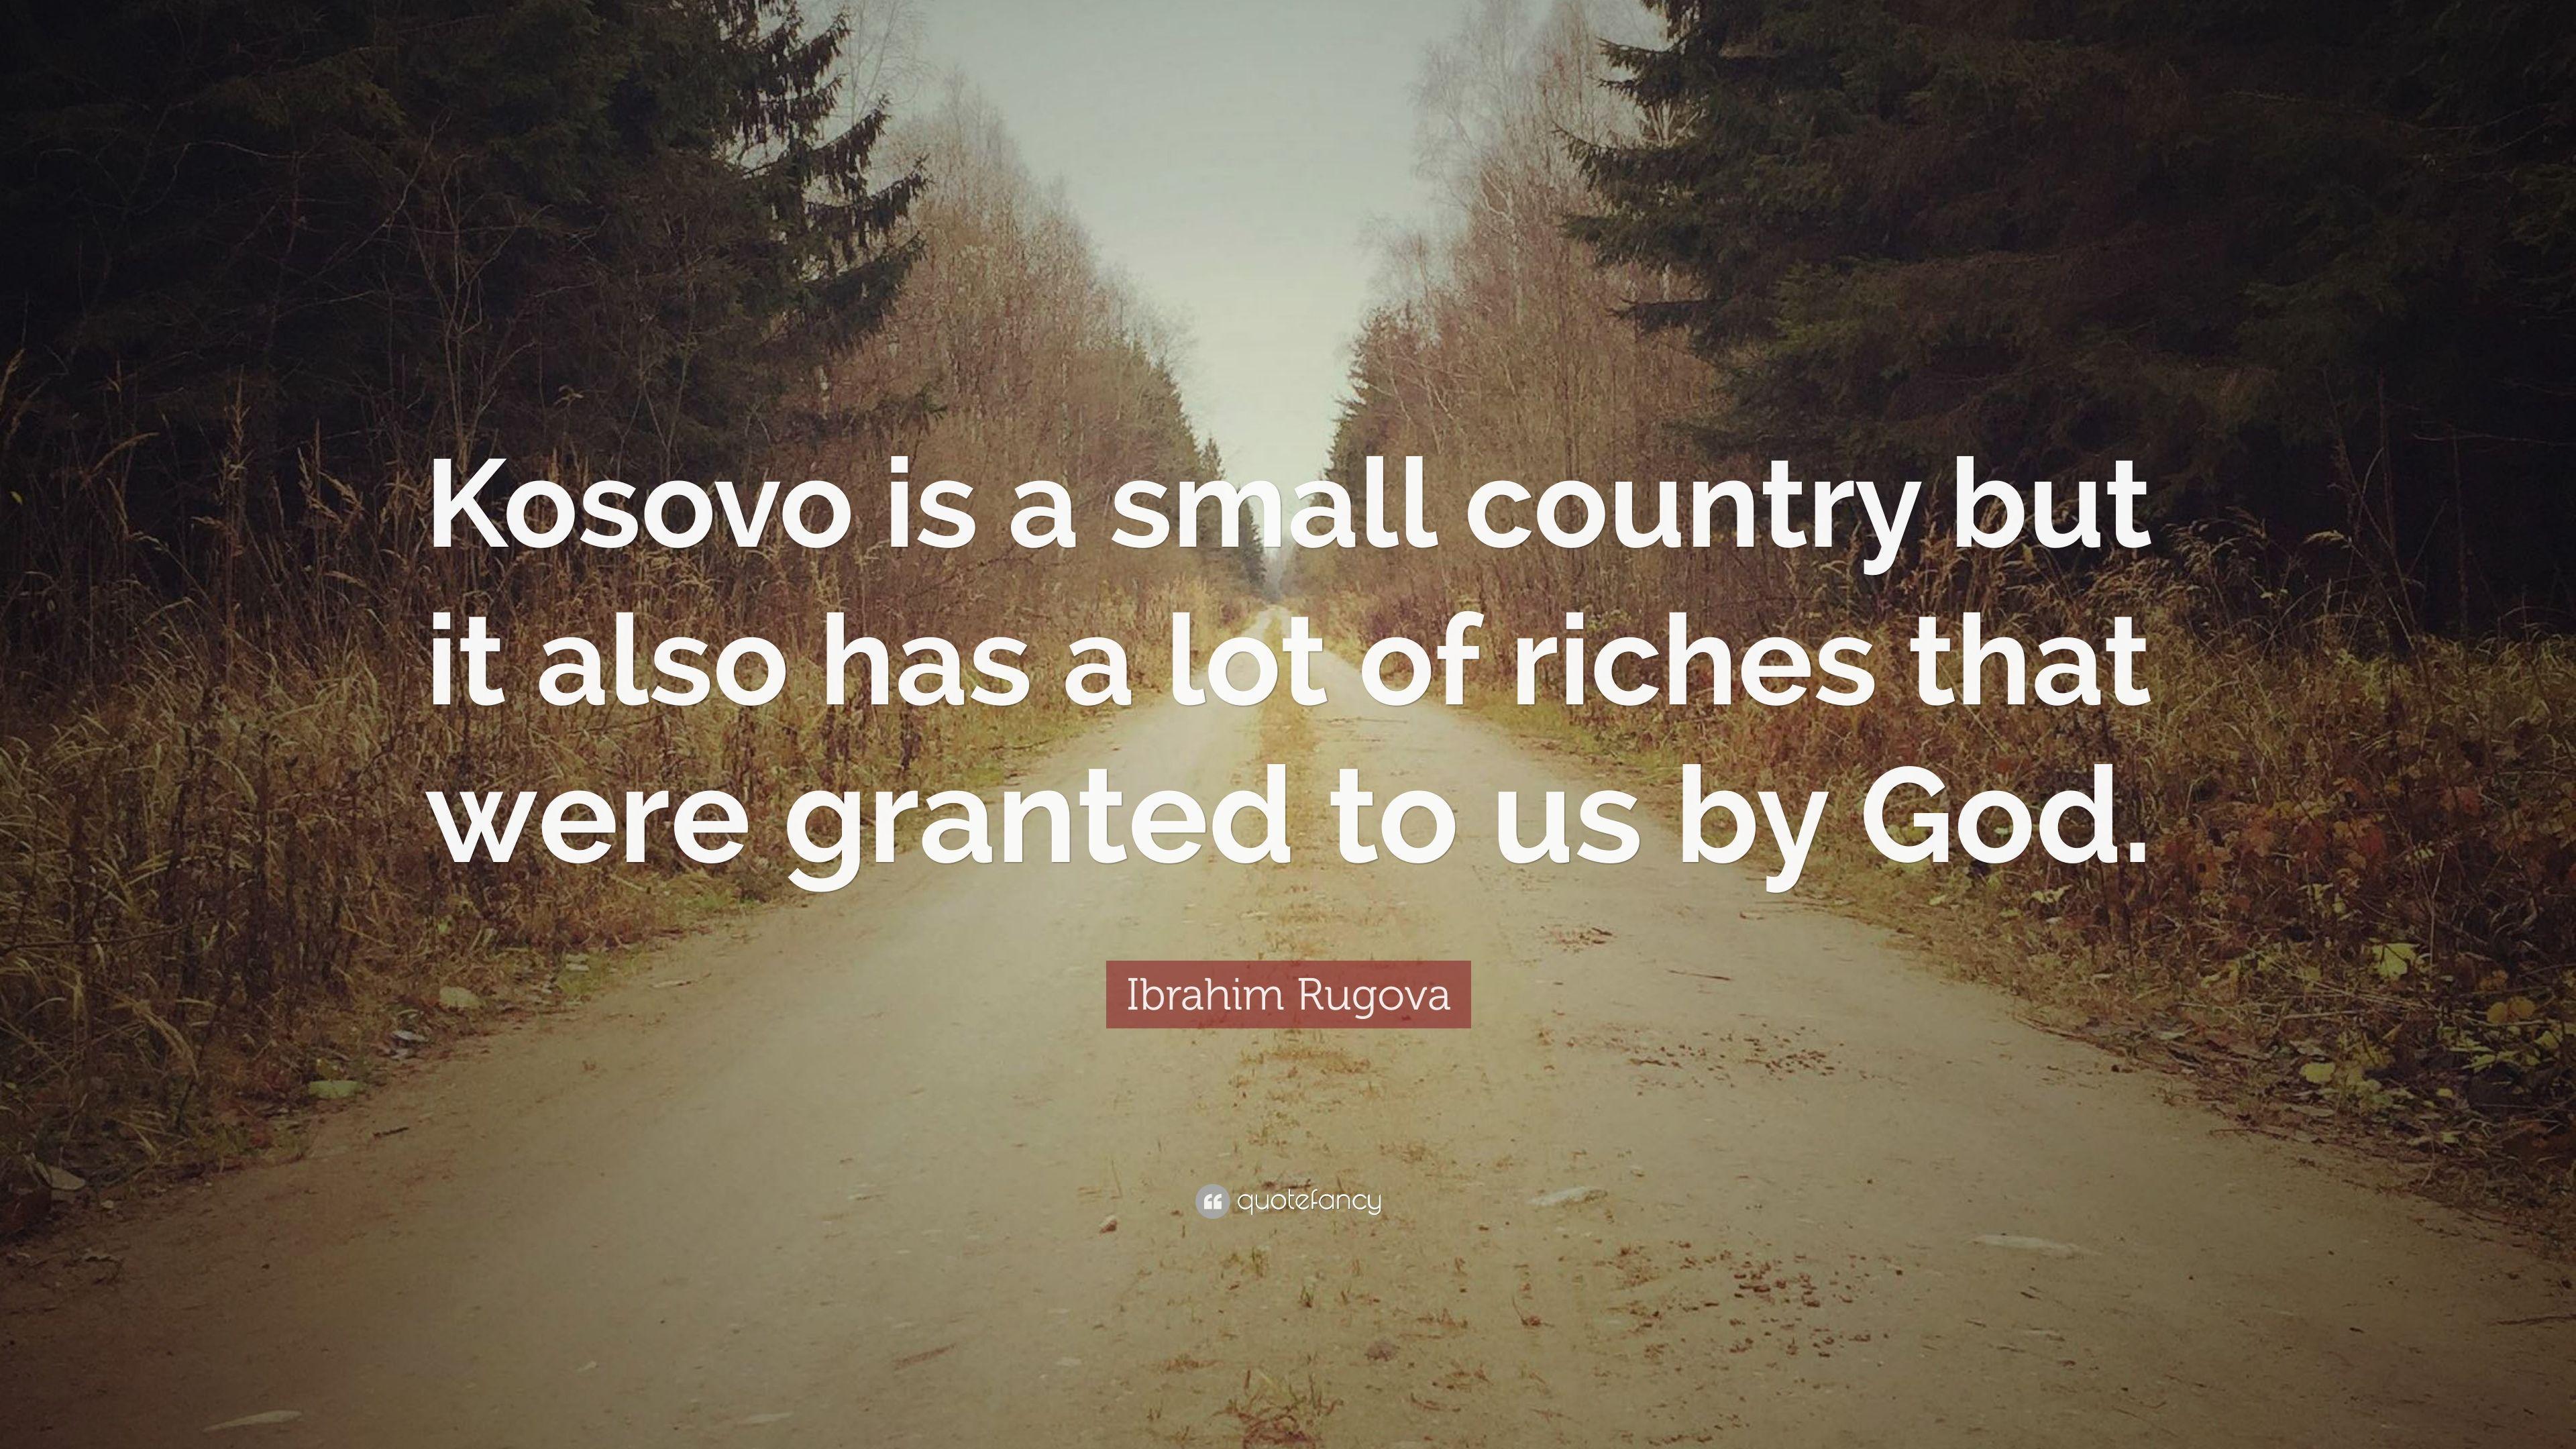 Ibrahim Rugova Quote: “Kosovo is a small country but it also has a